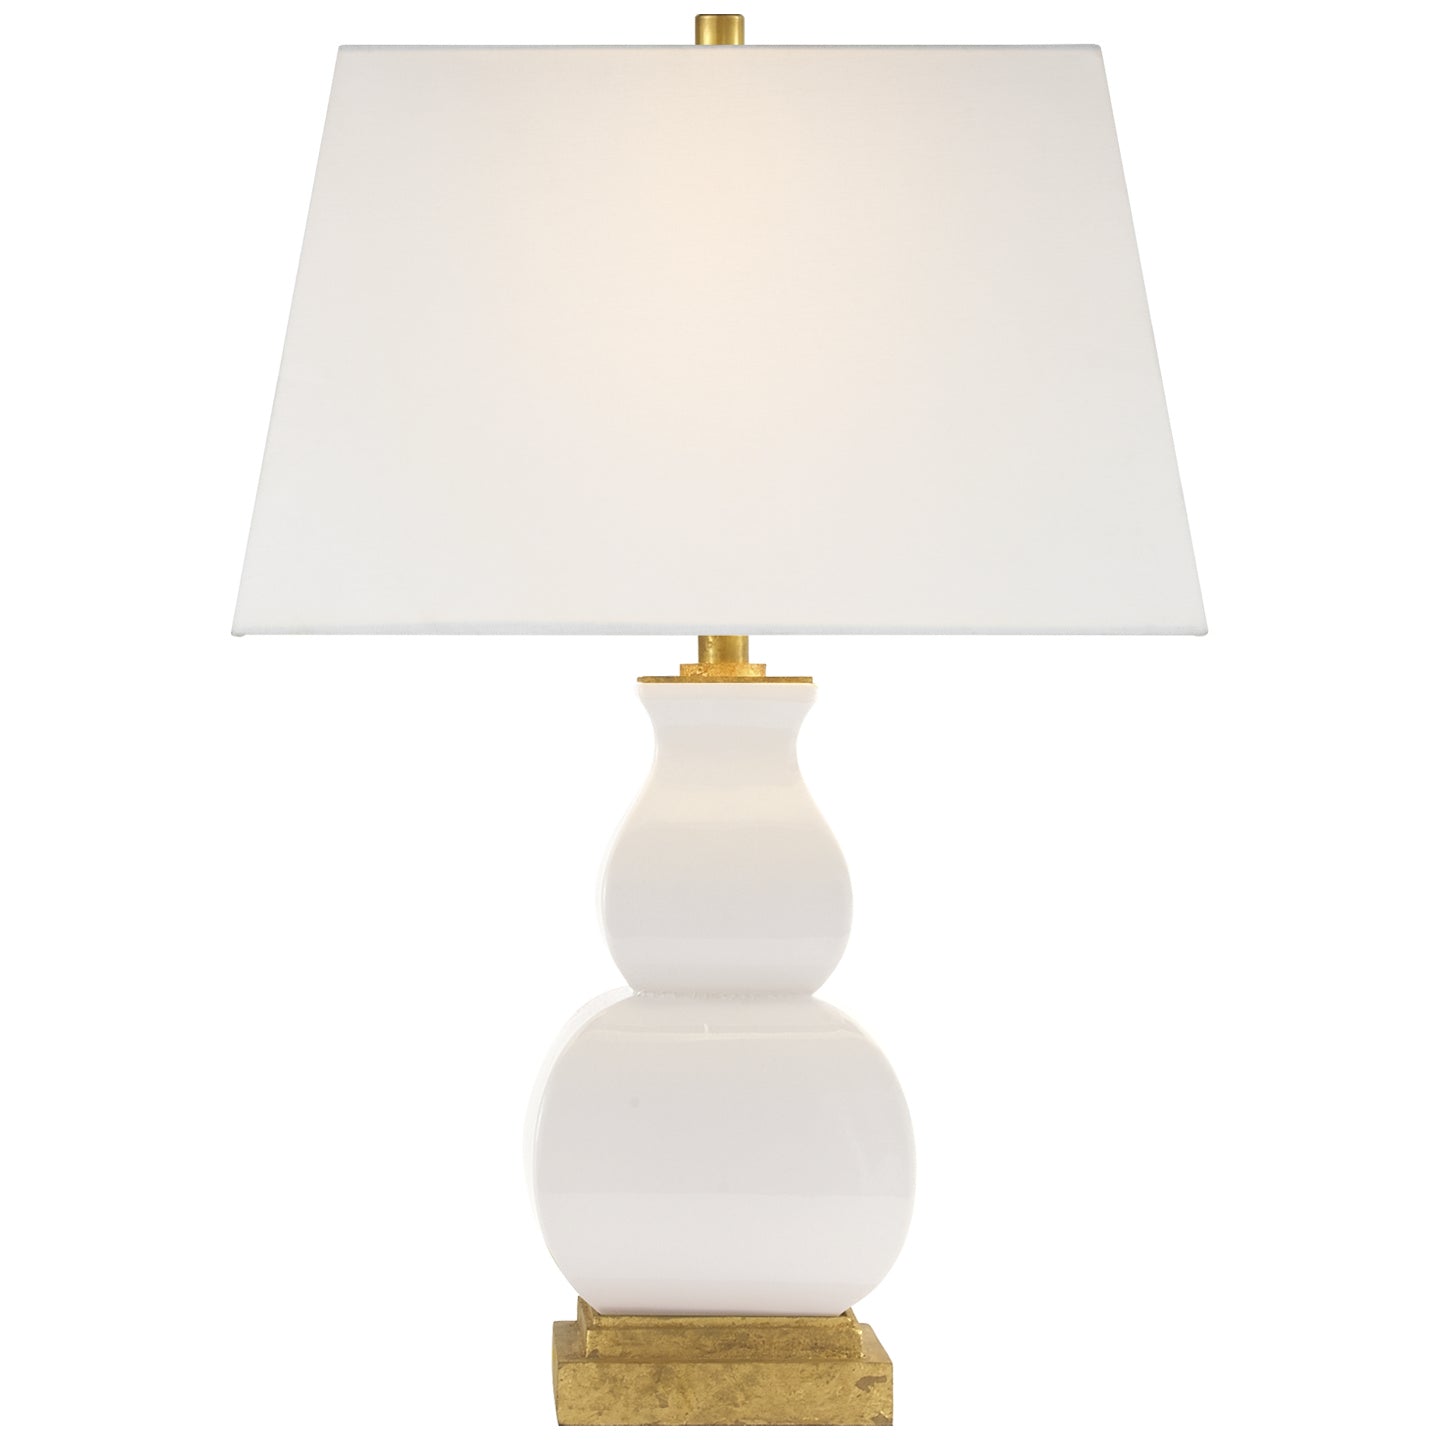 Visual Comfort Signature - CHA 8627IC-L - One Light Table Lamp - Fang Gourd - Ivory Crackle Ceramic